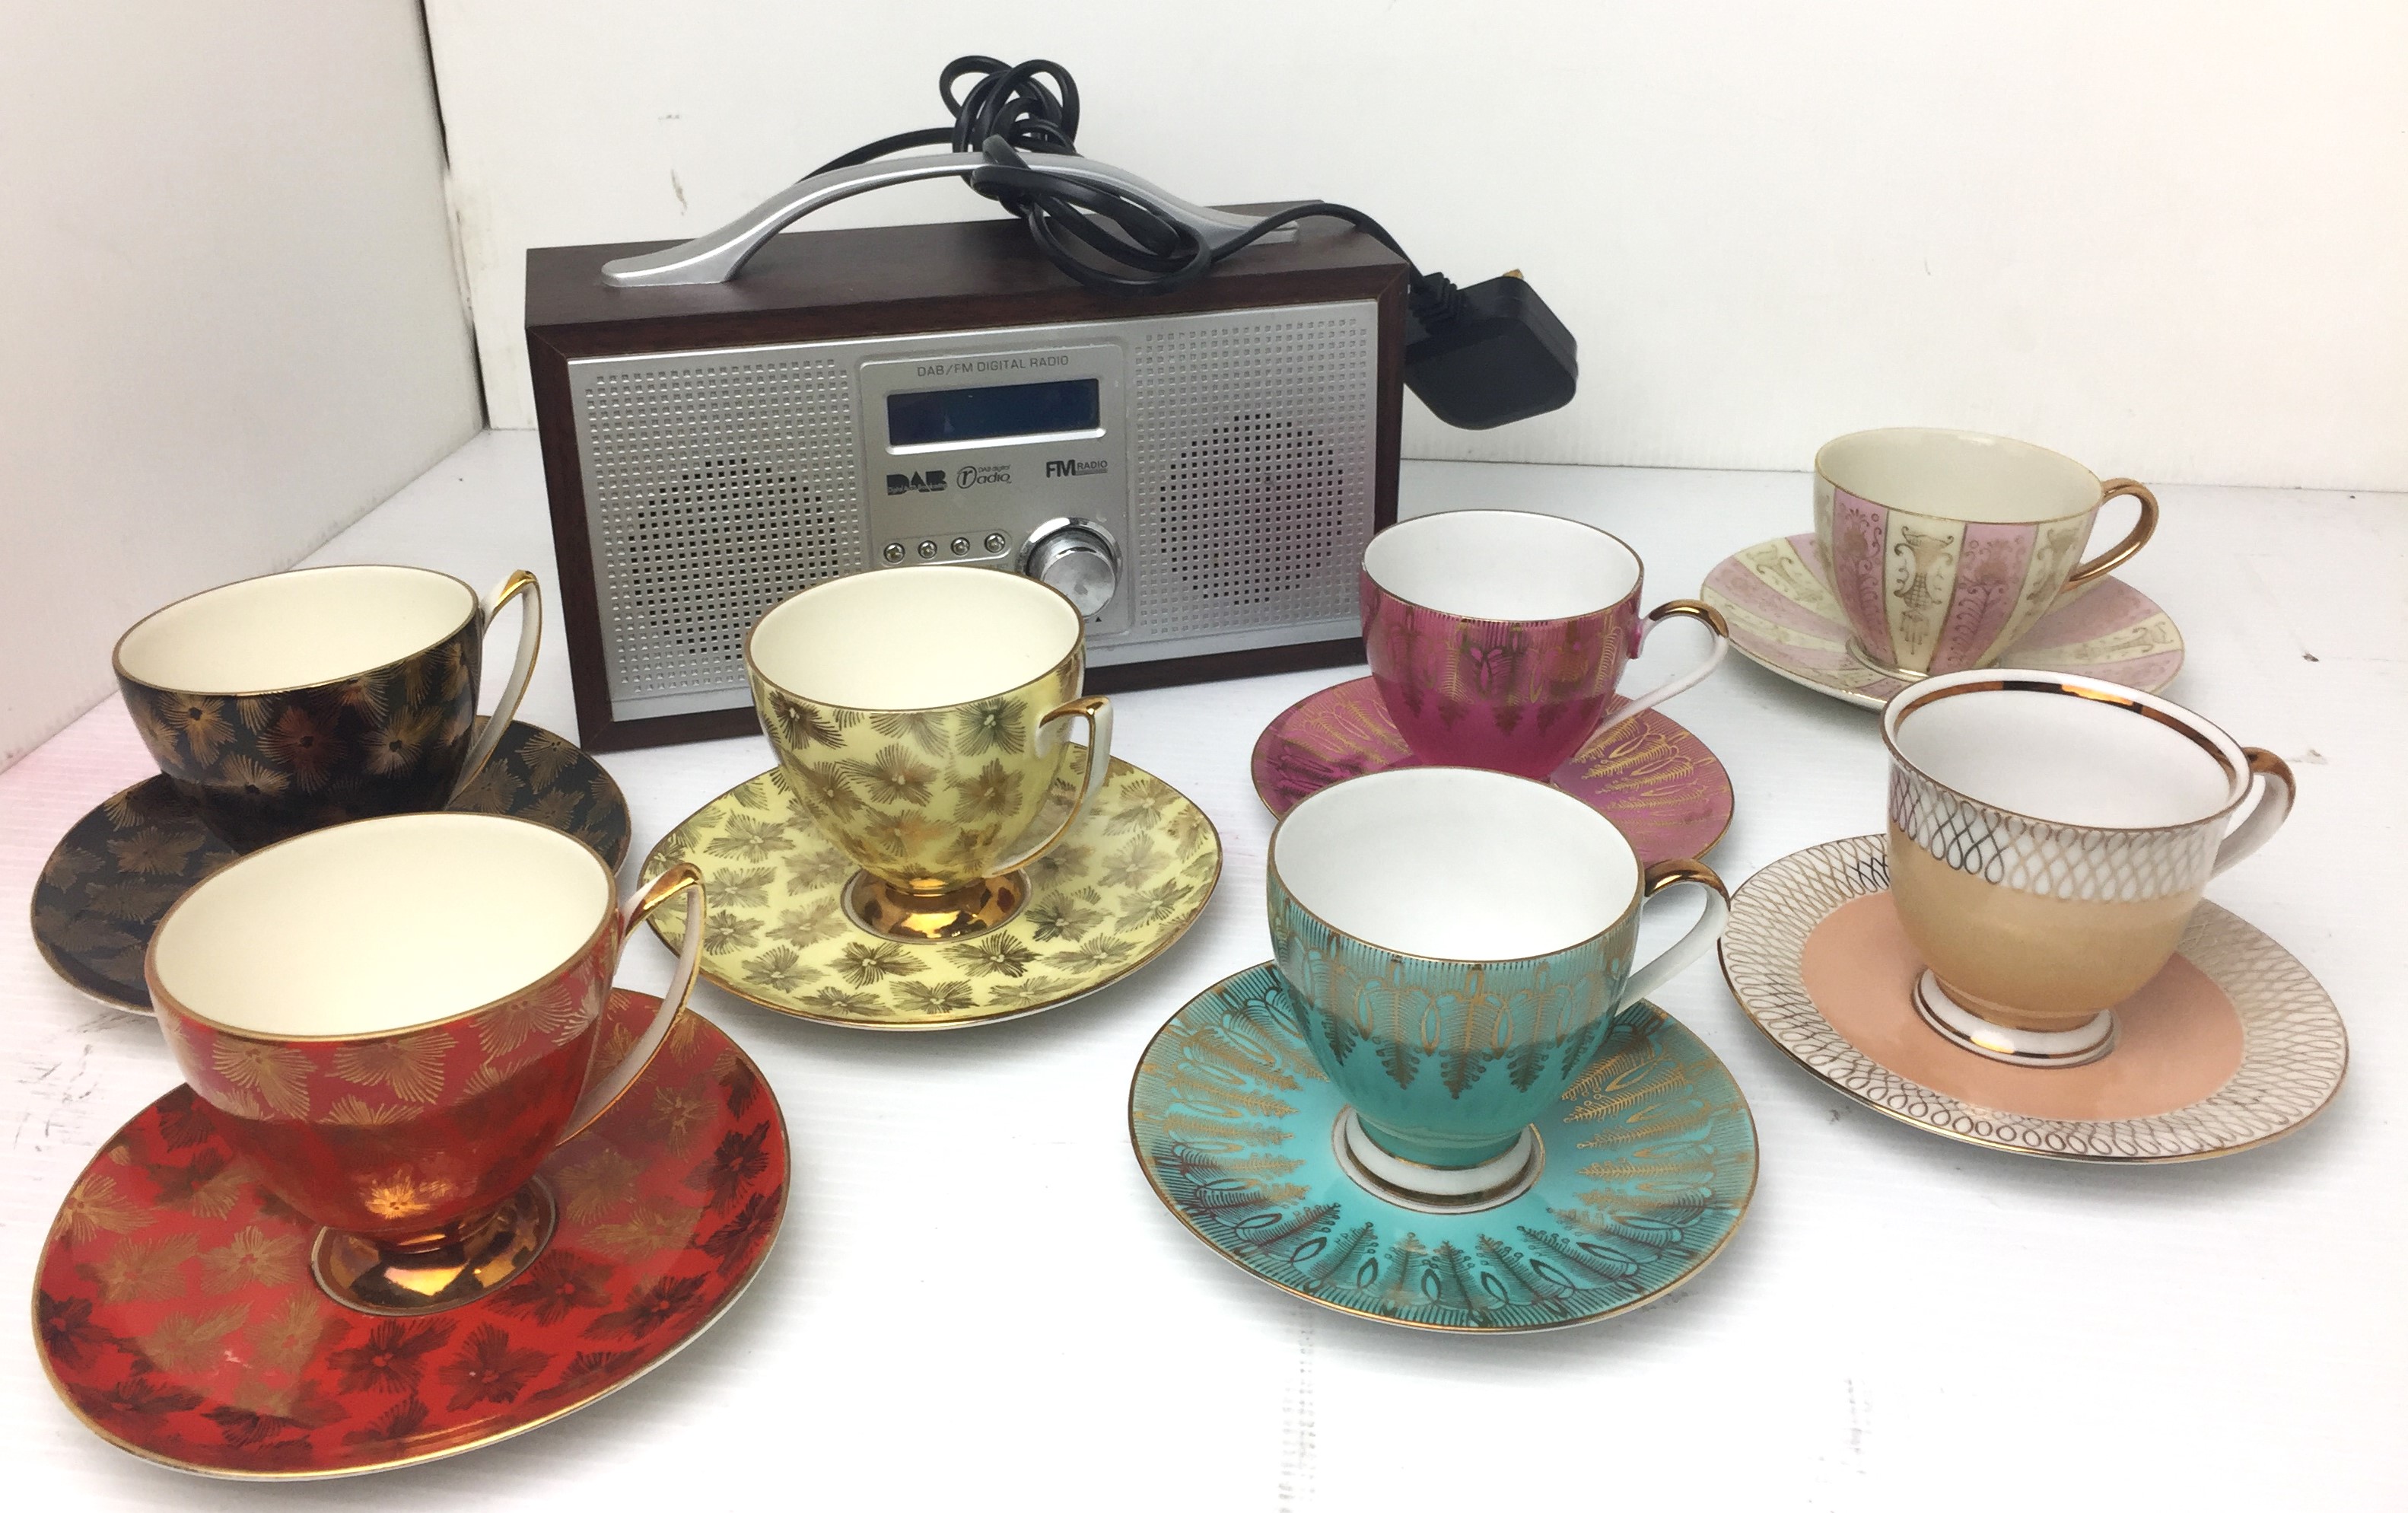 Contents to box - eight items including red-wood cased digital radio and seven cups and saucers -